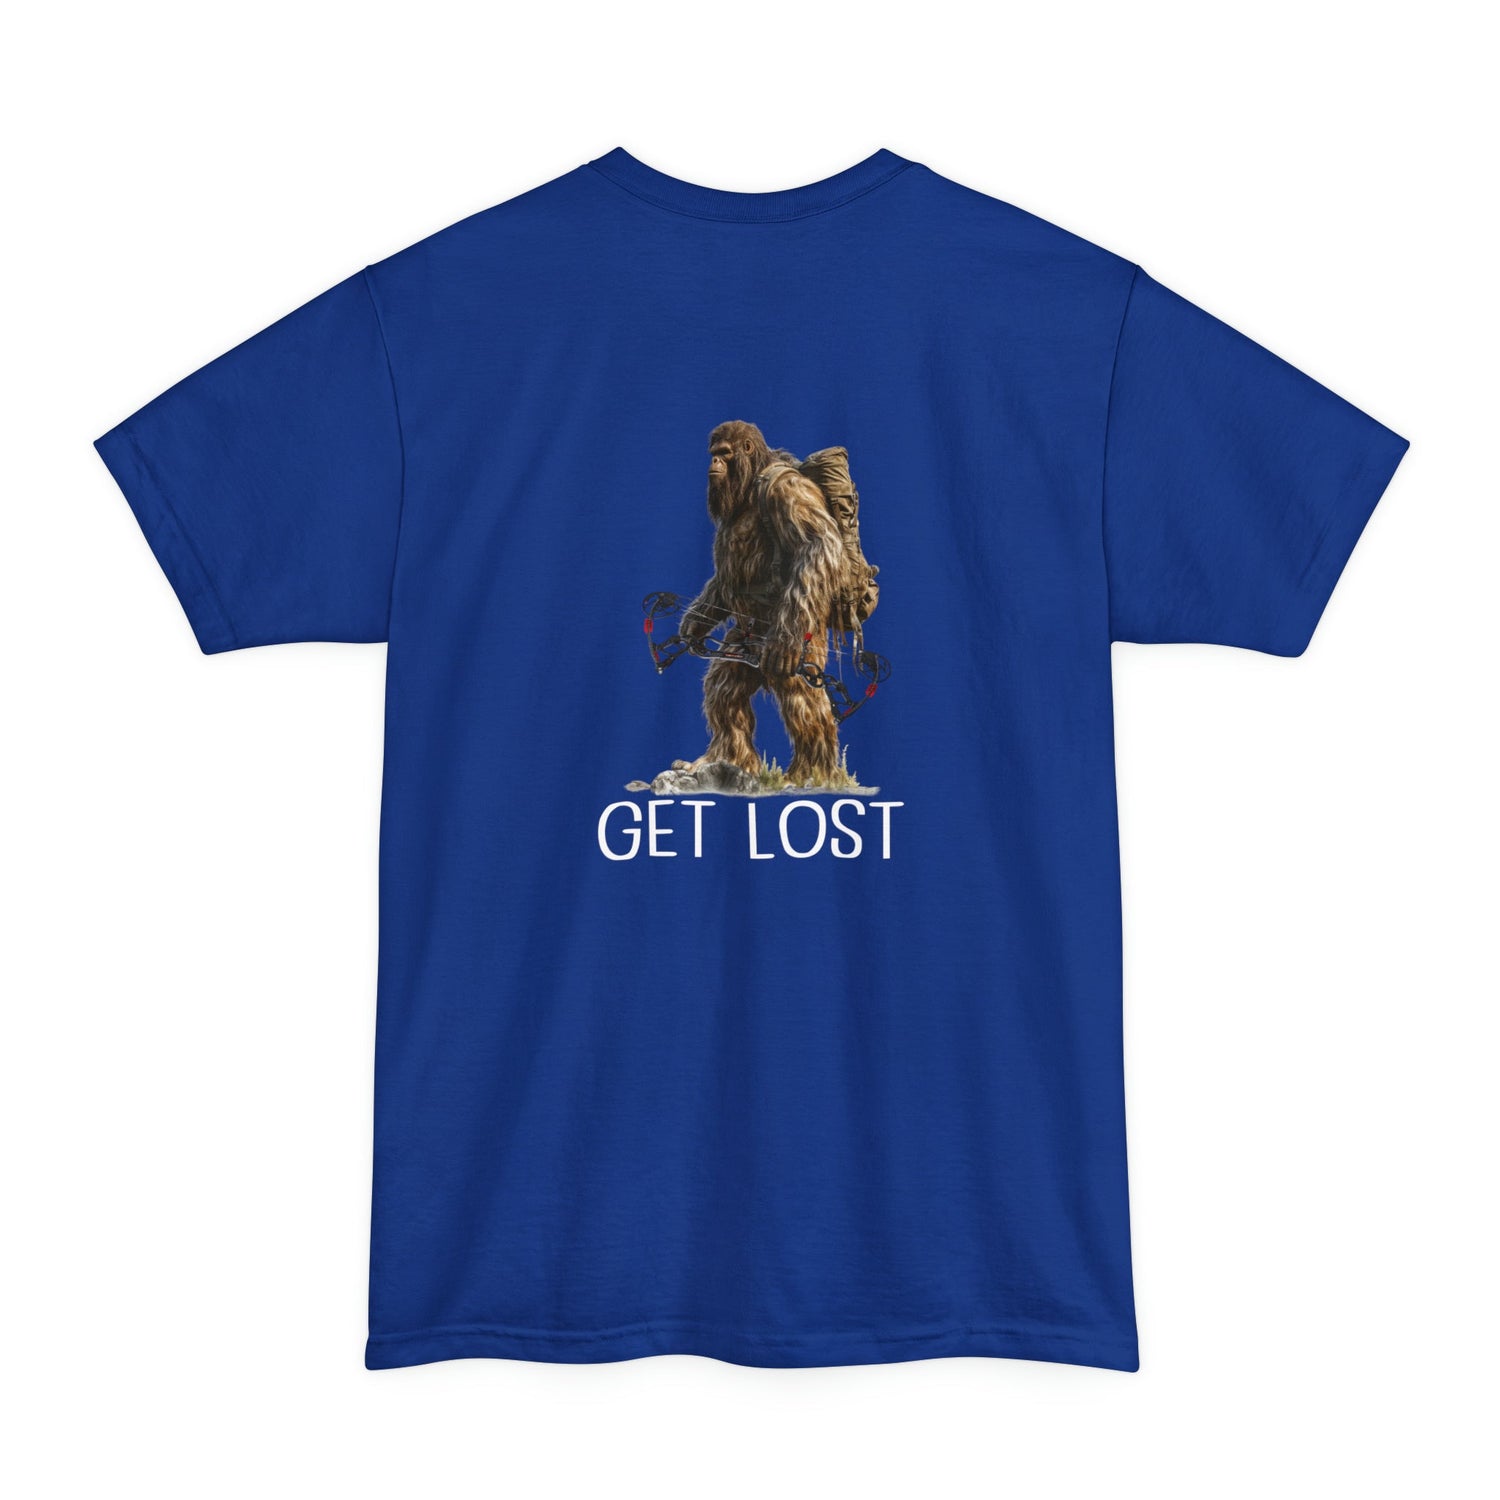 Big and tall bowhunting t-shirt, color blue, black design placement